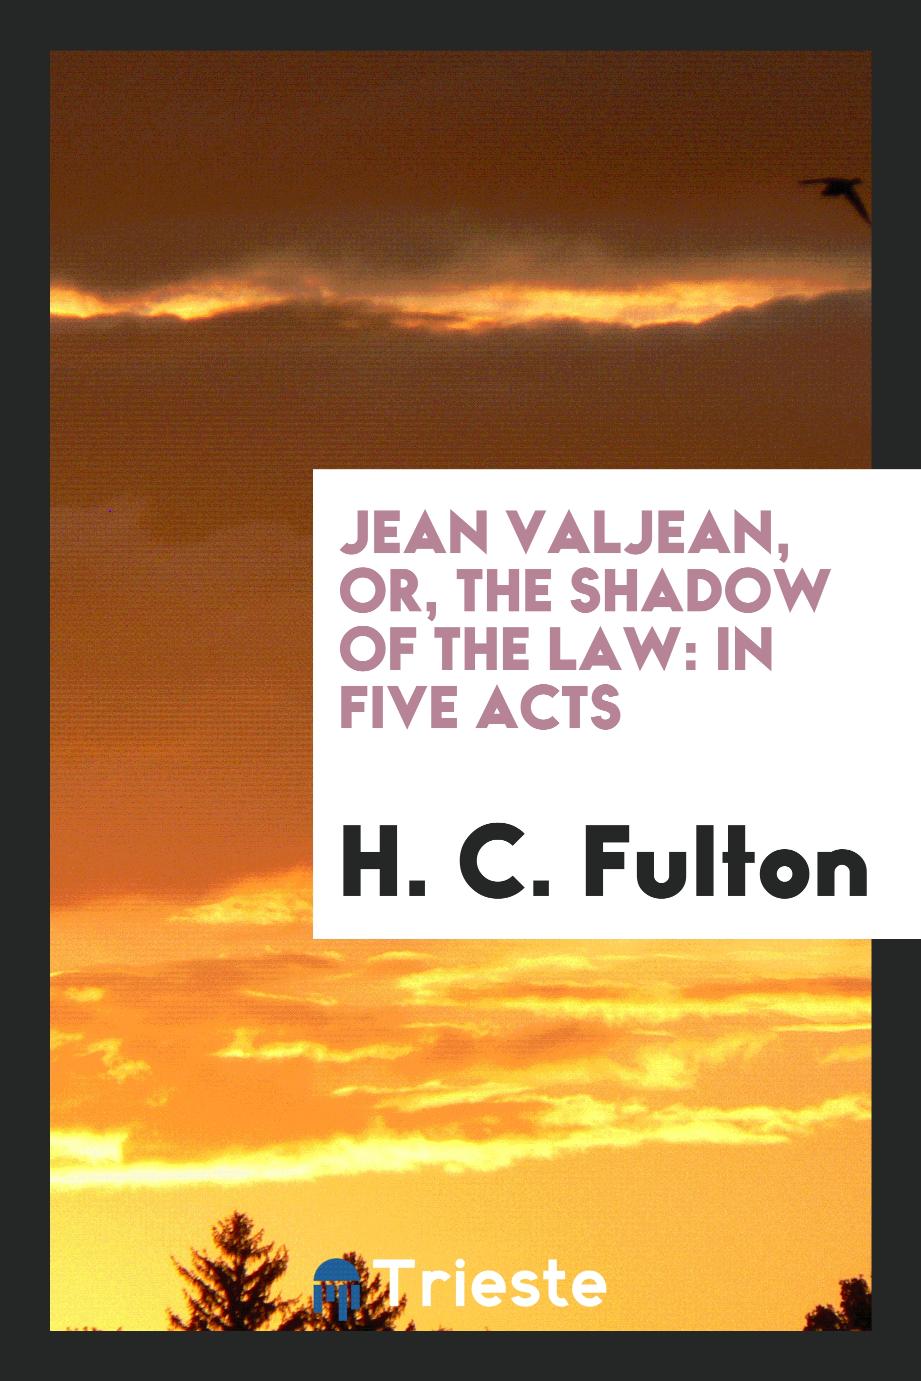 Jean Valjean, Or, The Shadow of the Law: In Five Acts